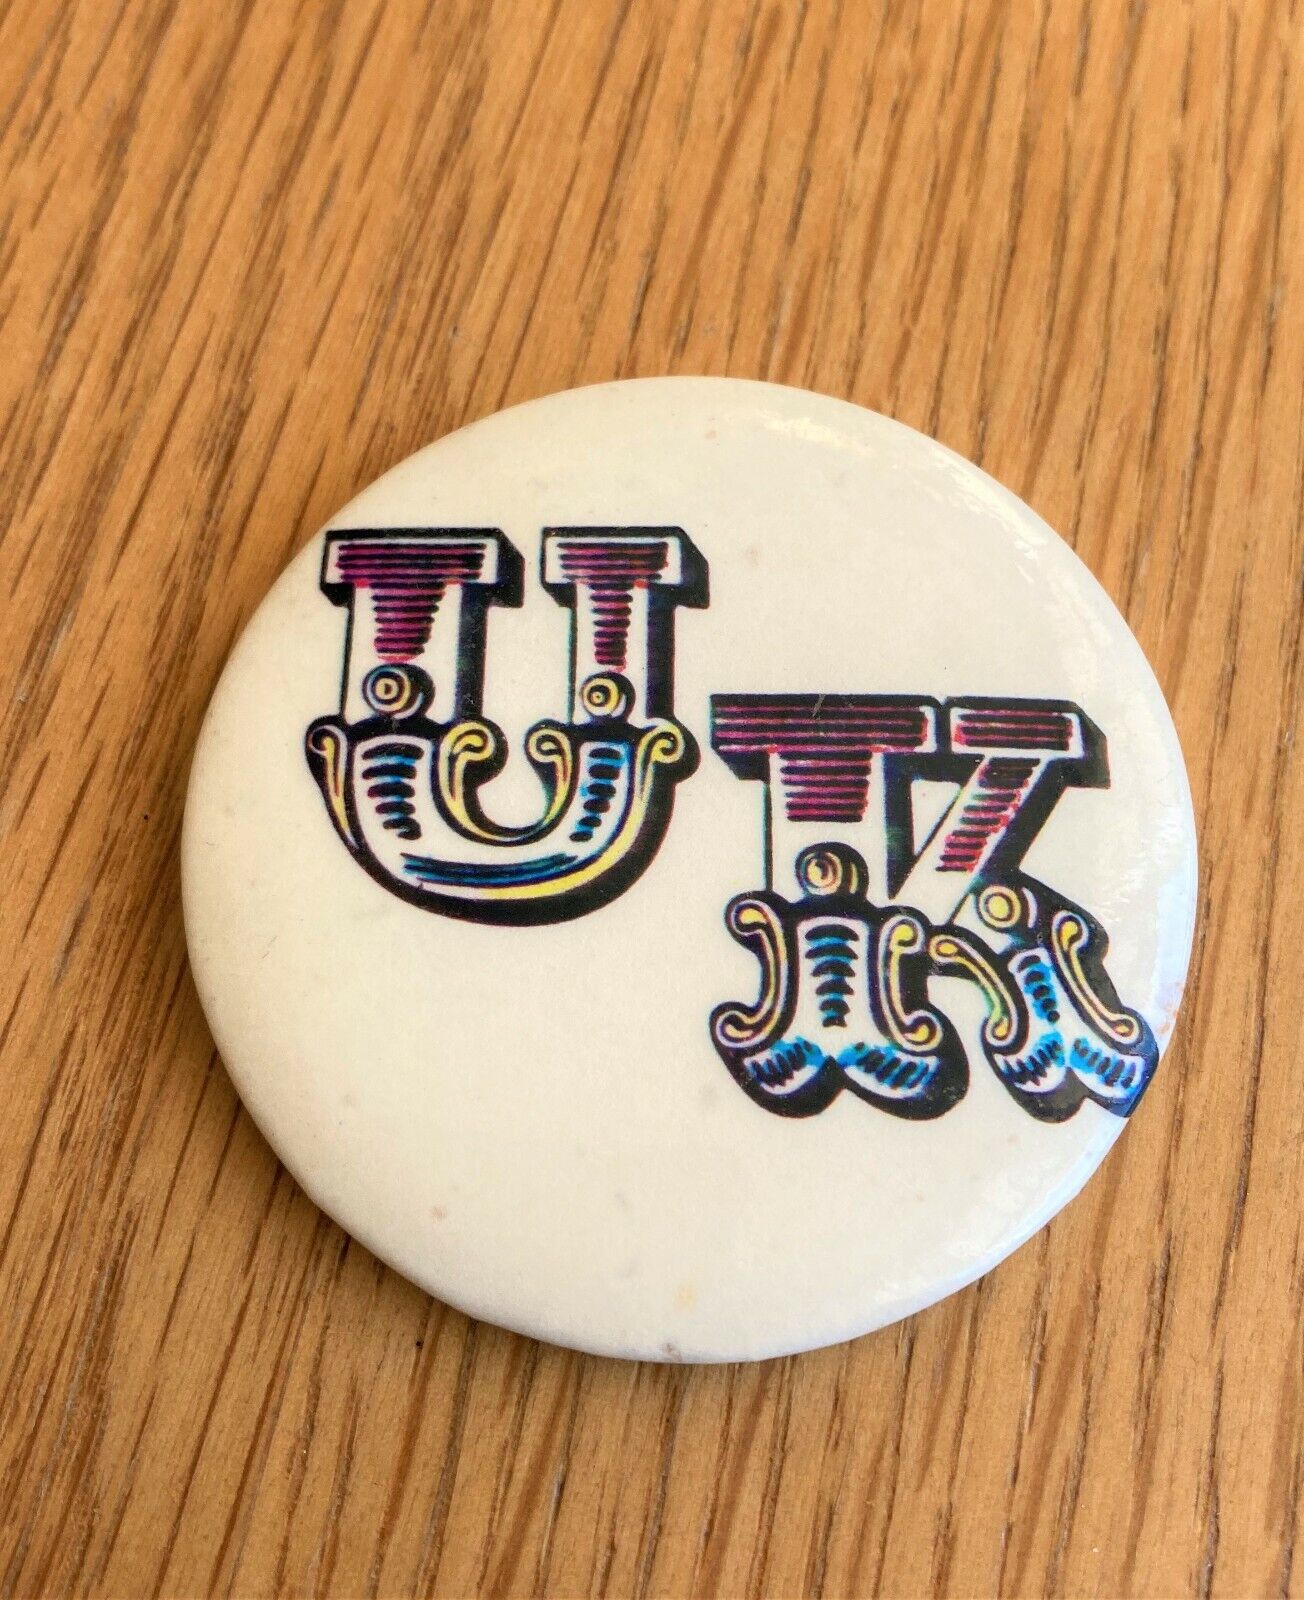 UK (BAND) LARGE VINTAGE METAL PIN BADGE FROM THE 1970\'s PROGRESSIVE ROCK